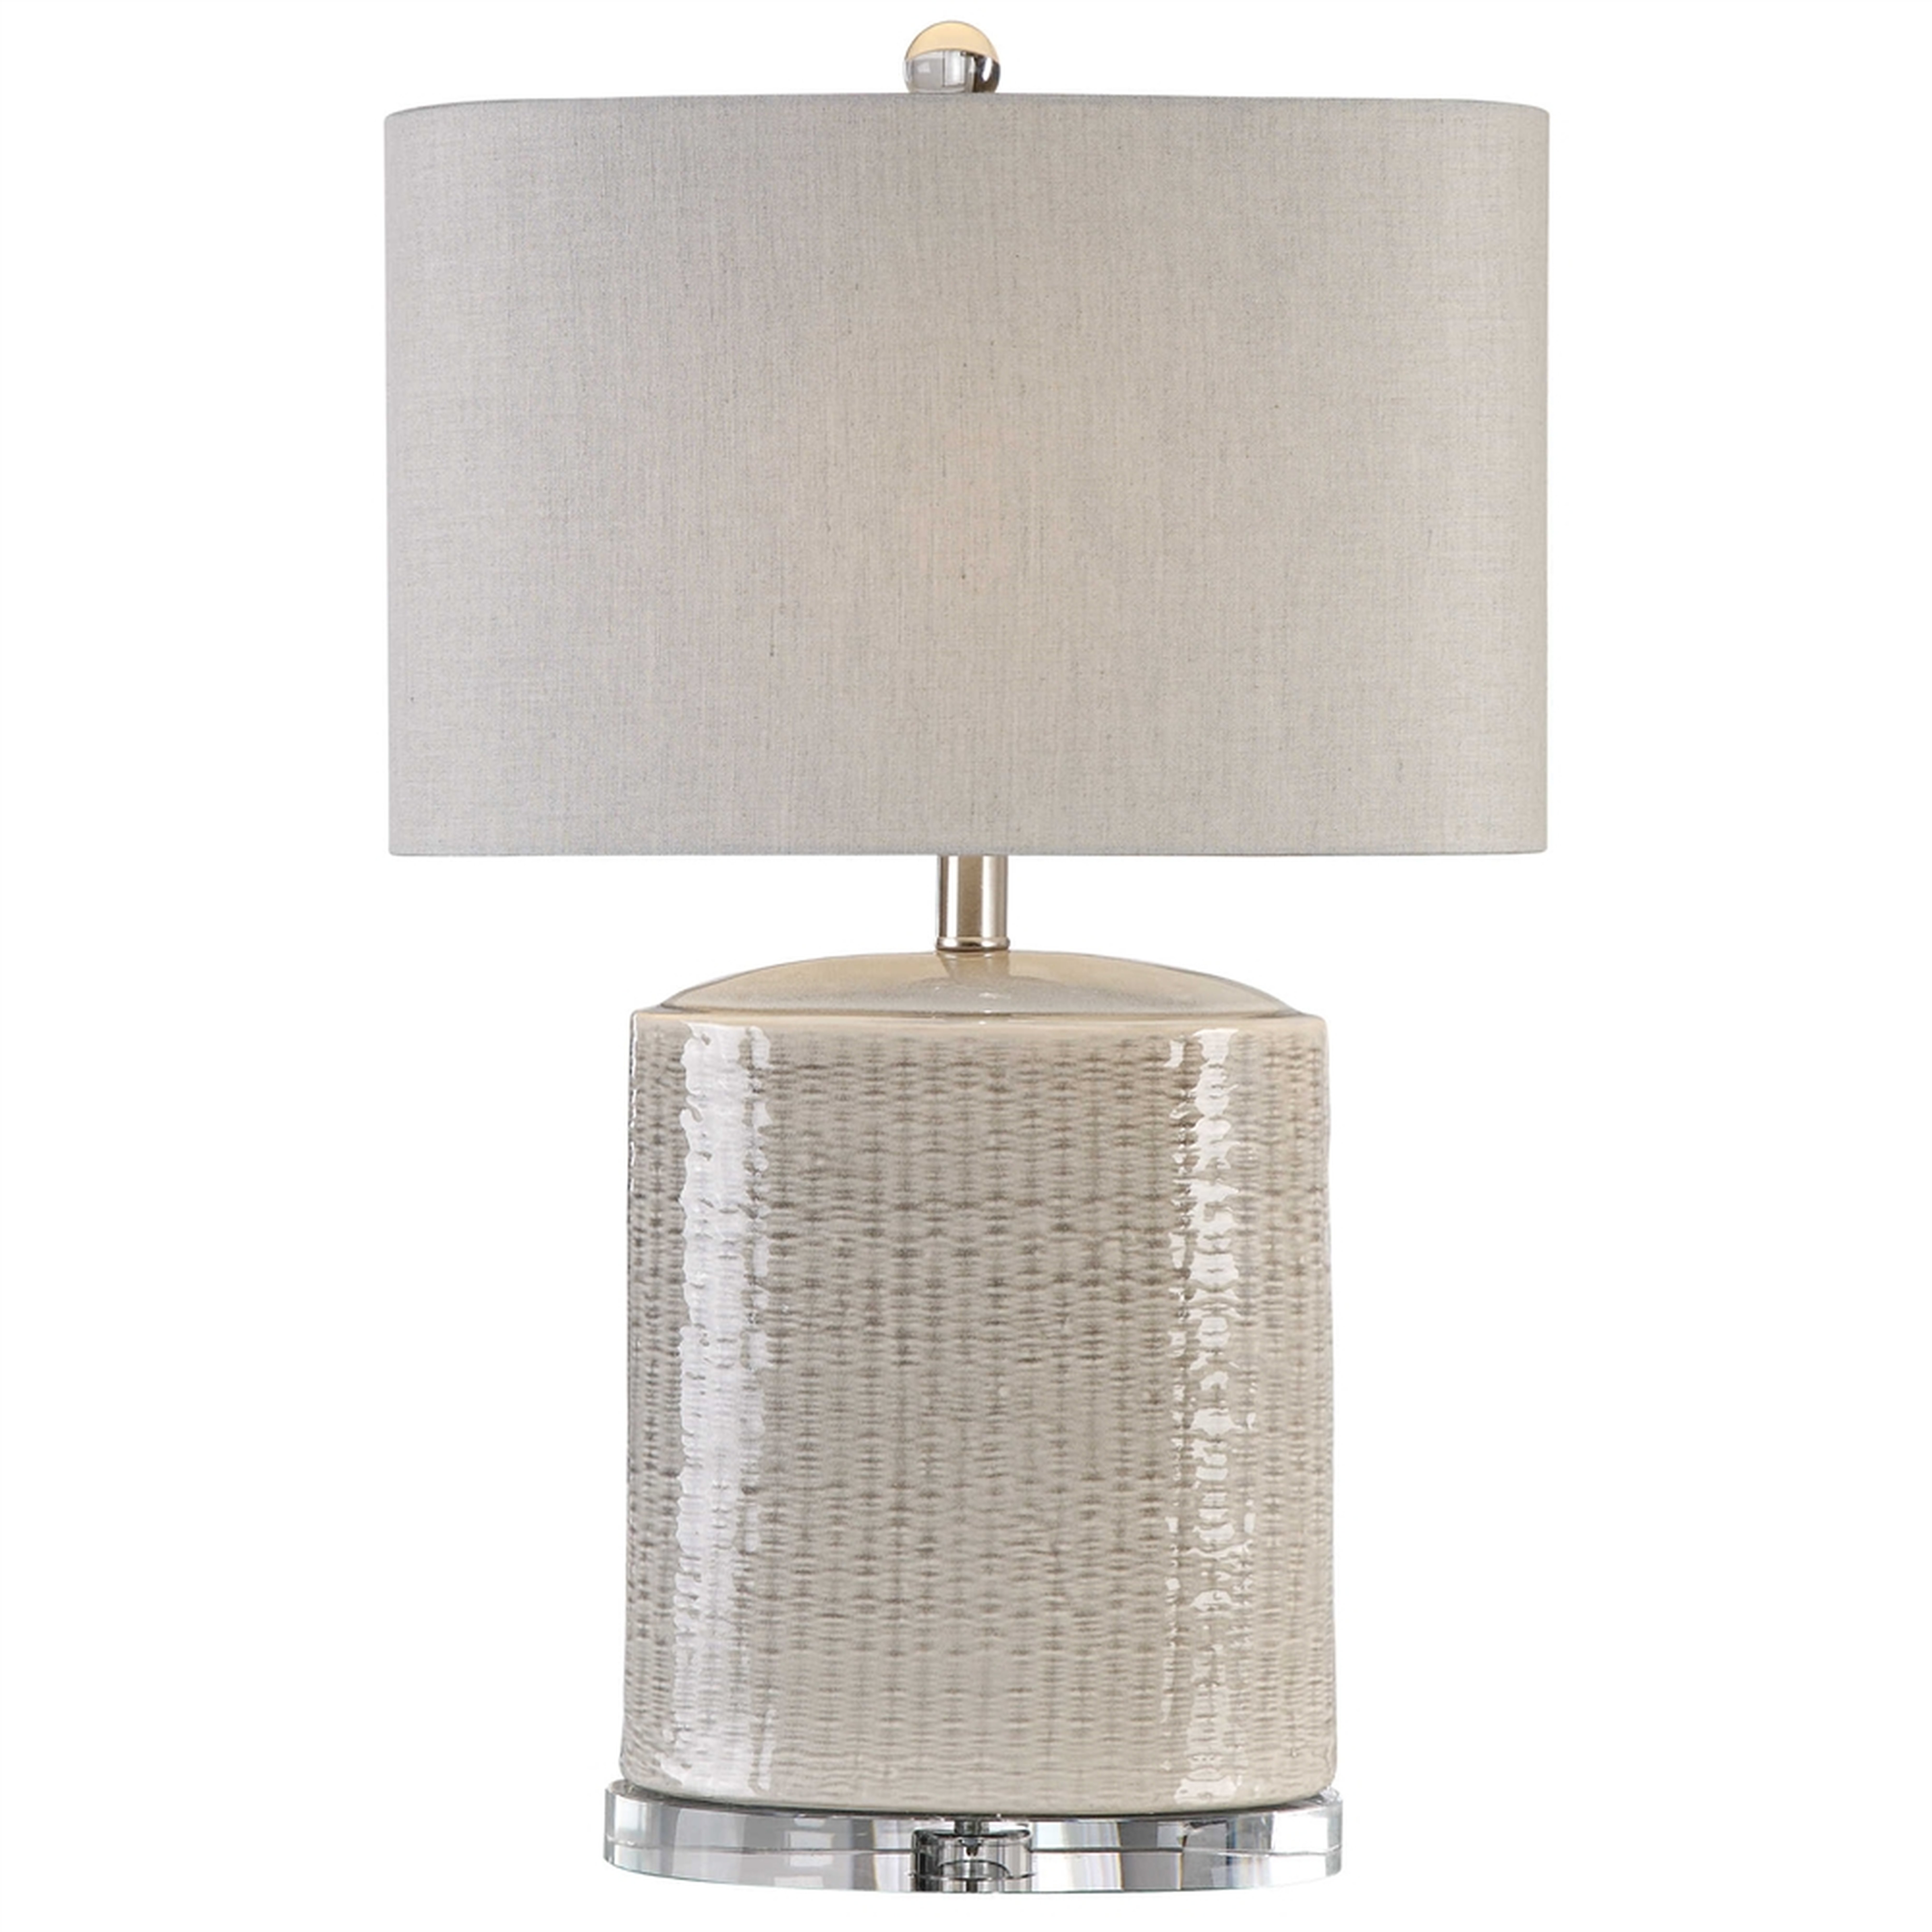 Modica Table Lamp - Hudsonhill Foundry